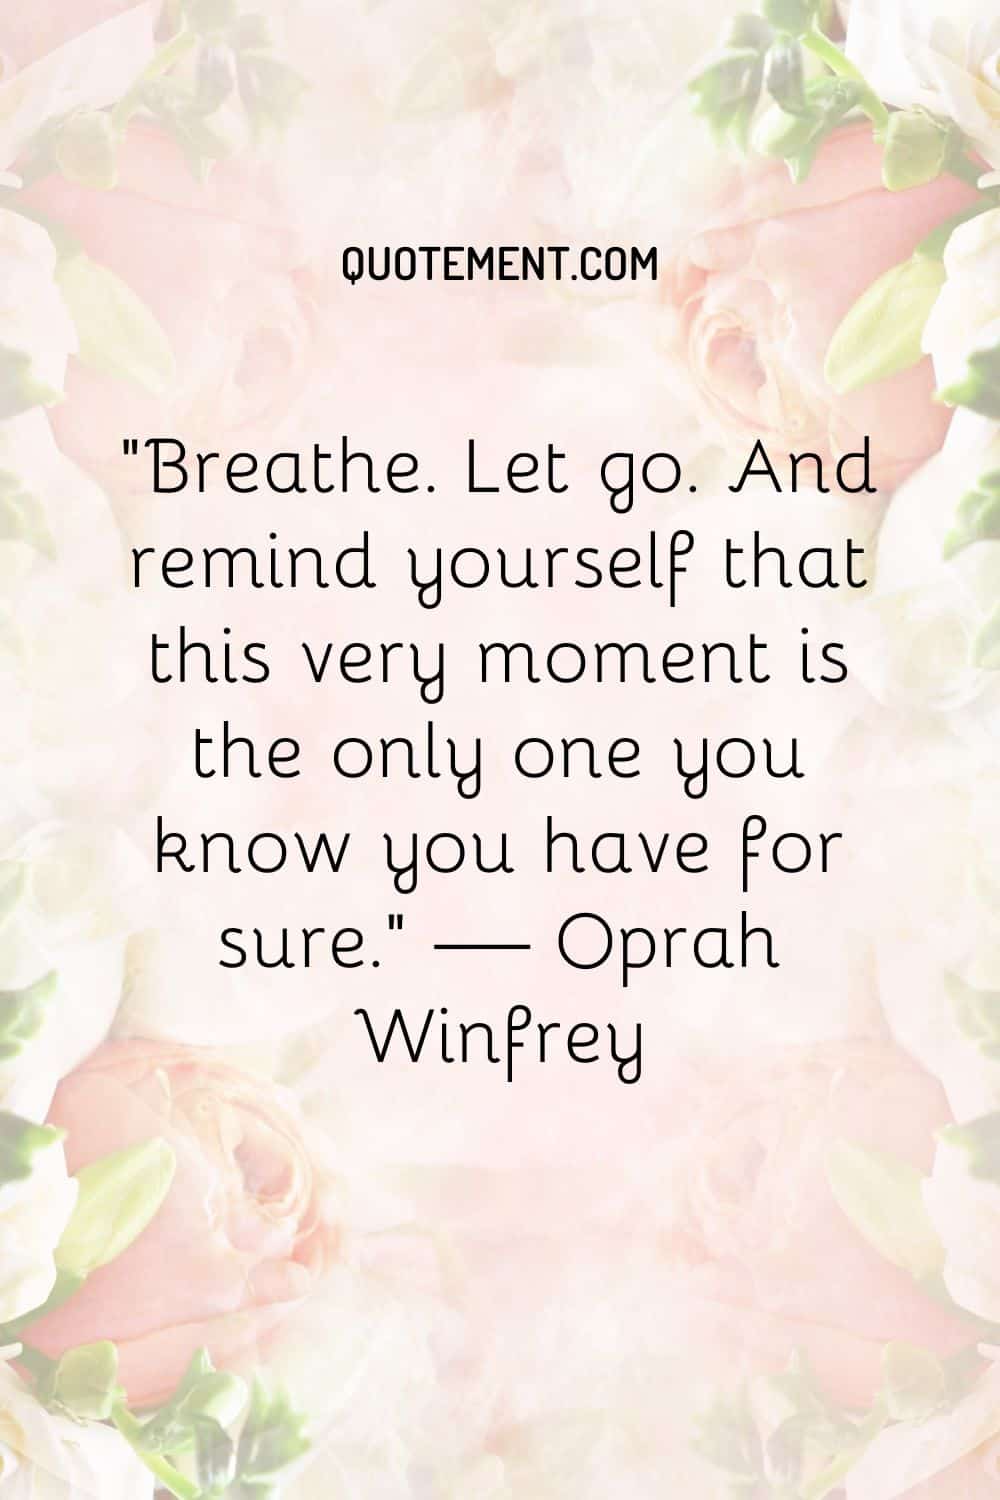 Breathe. Let go. And remind yourself that this very moment is the only one you know you have for sure